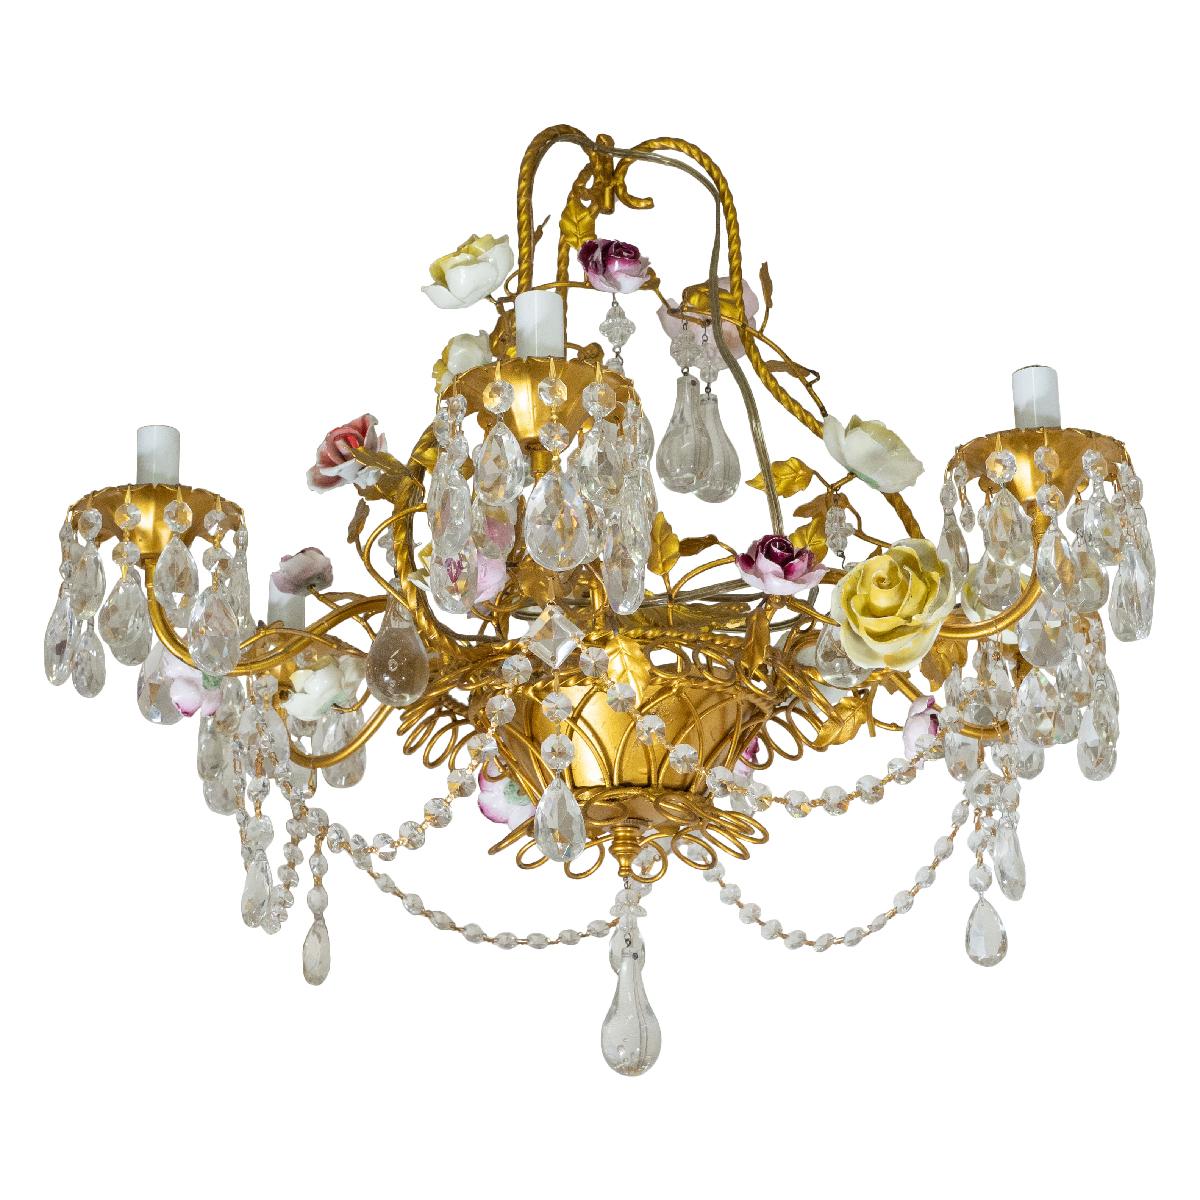 Gold painted iron chandelier with faceted crystal beads, drop elements and ceramic flower details.